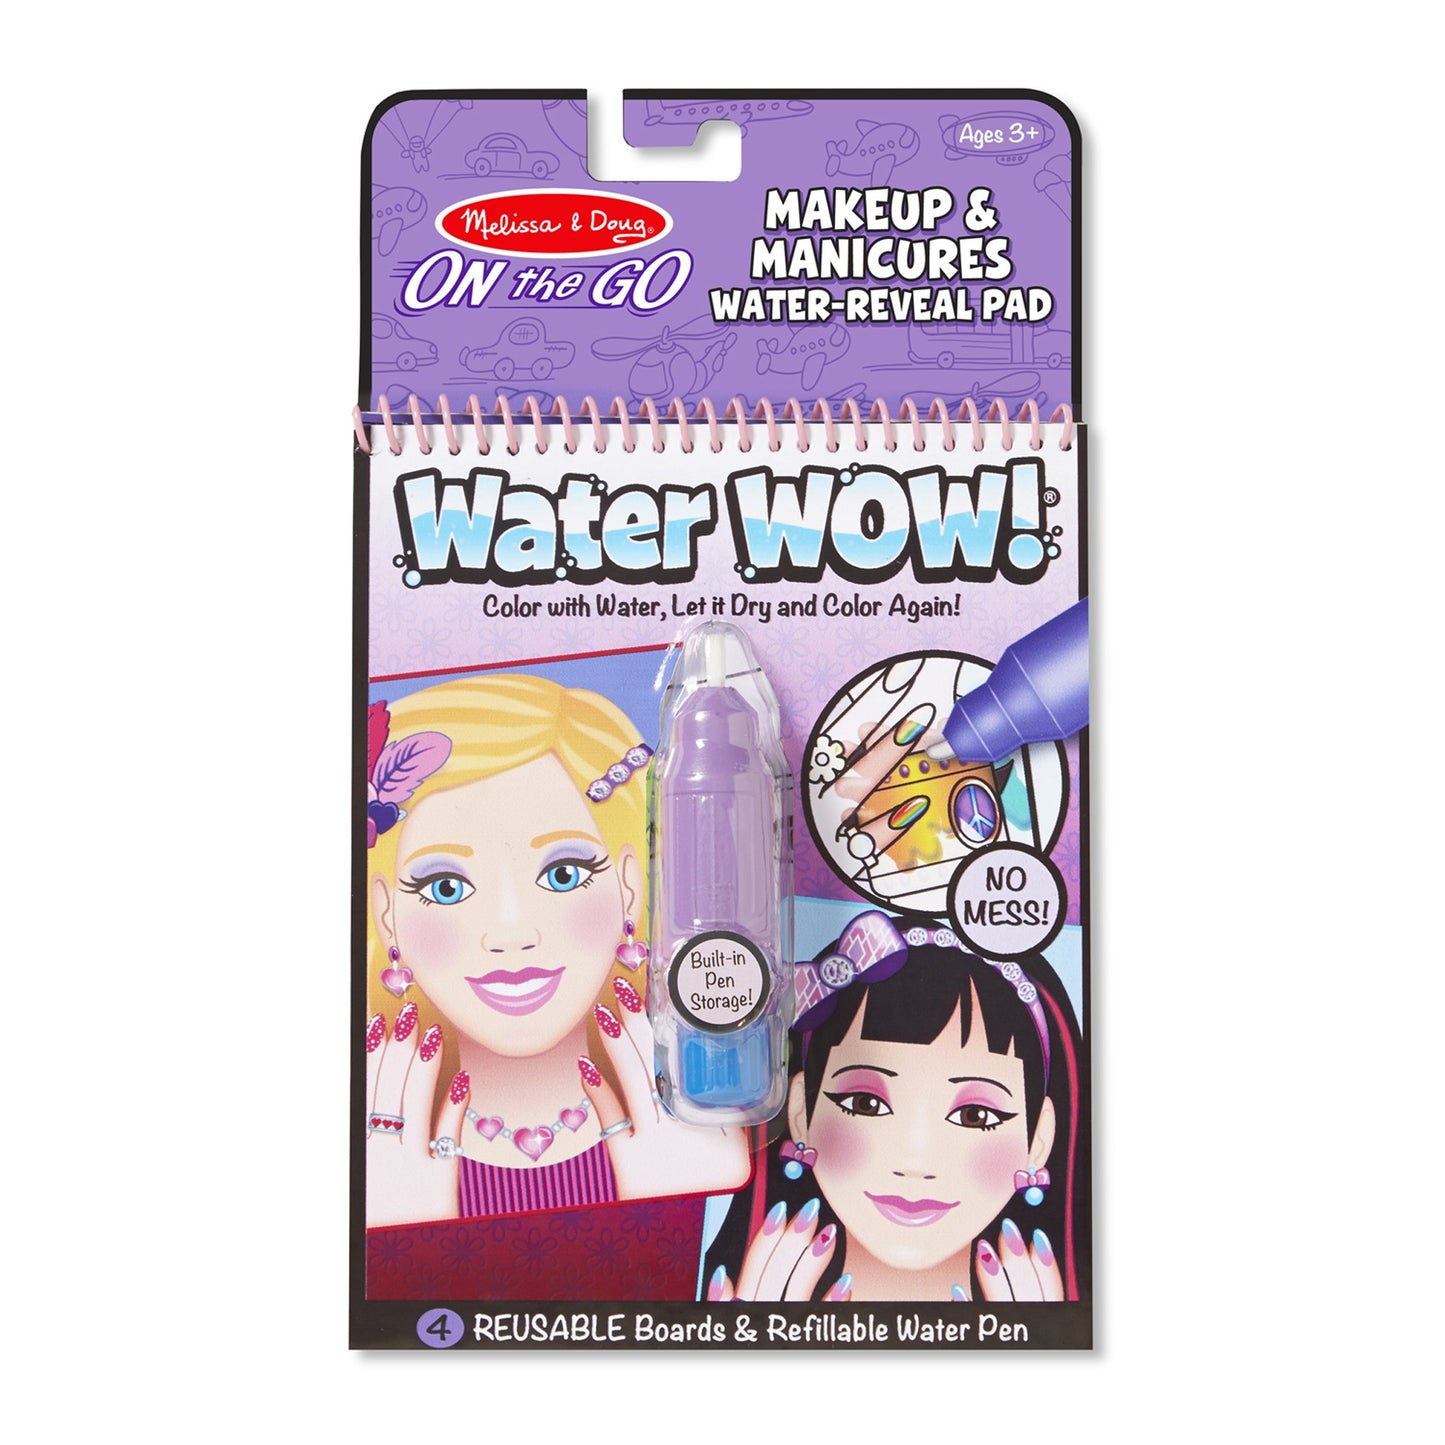 saltet Løfte Risikabel Melissa & Doug water wow Makeup and manicures – All About Kids Odense